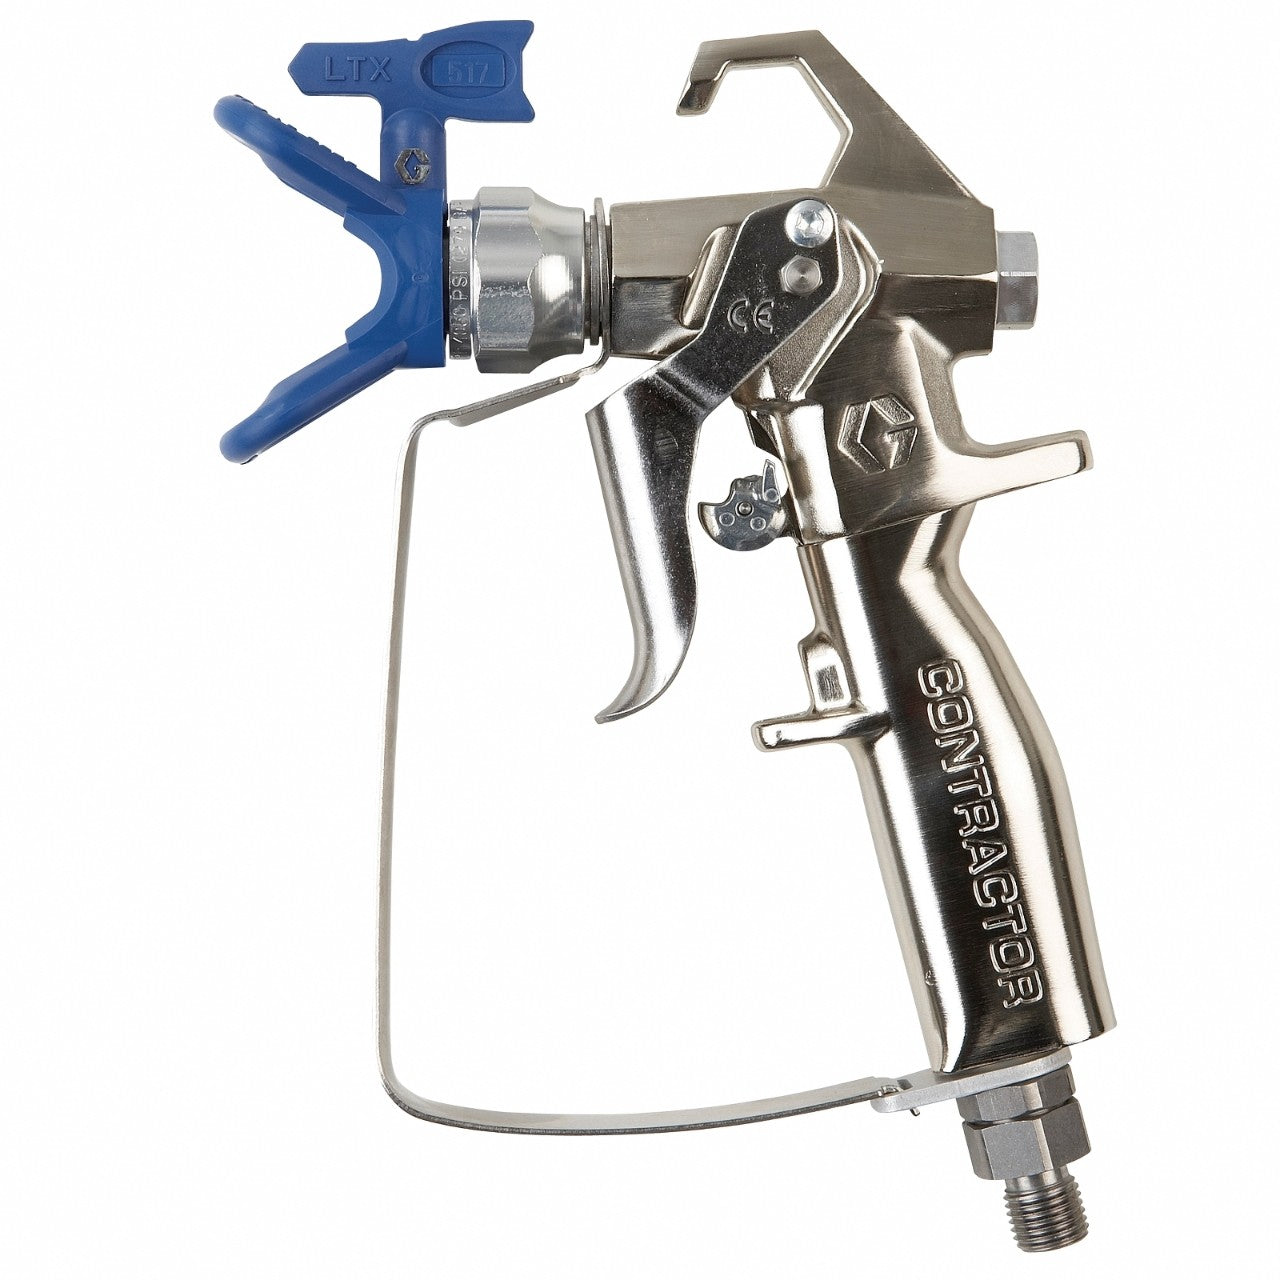 GRACO Contractor Airless Spray Gun, 2 Finger Trigger, RAC X 517 SwitchTip